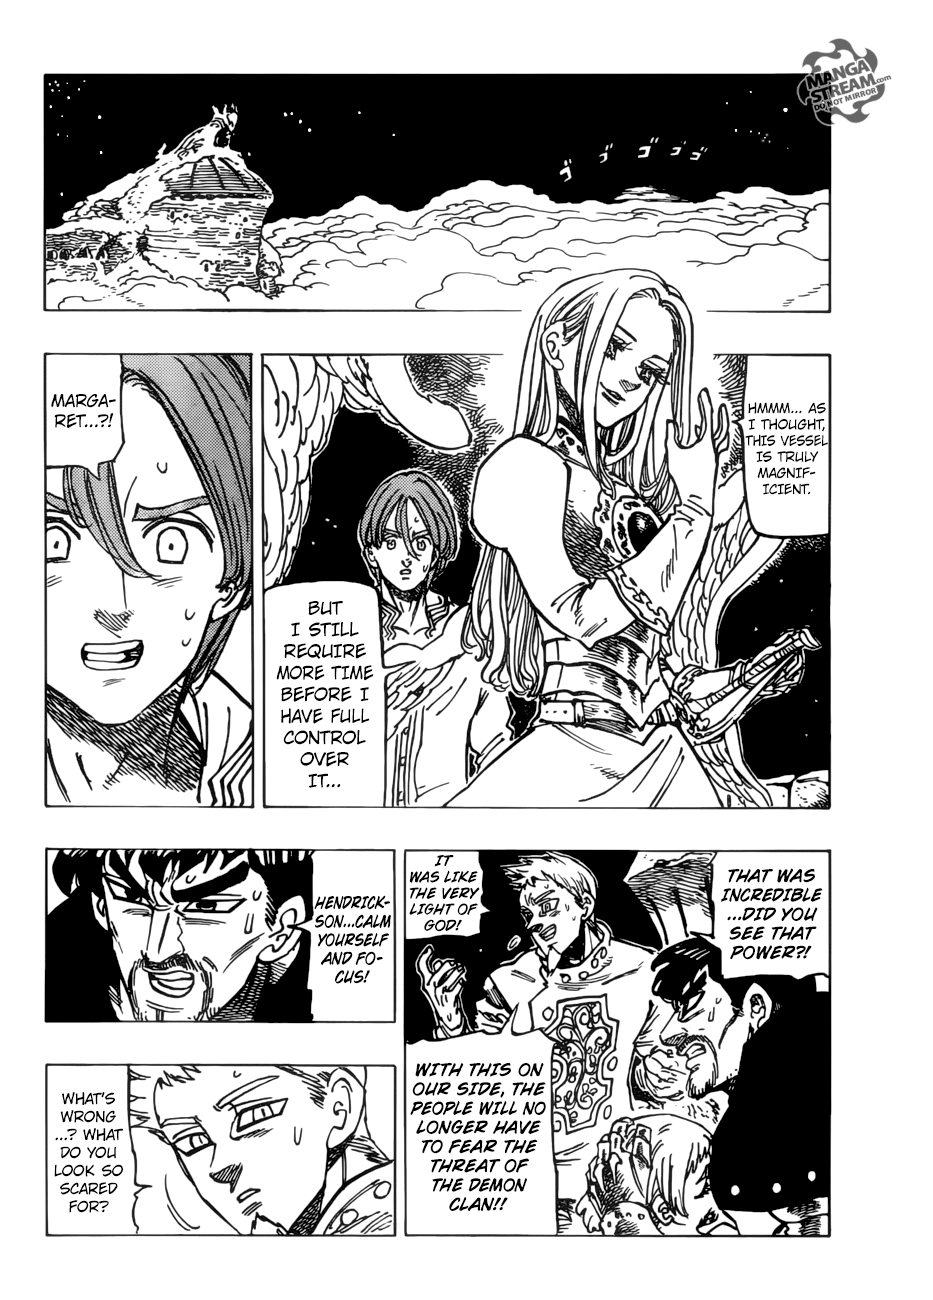 The Seven Deadly Sins 250